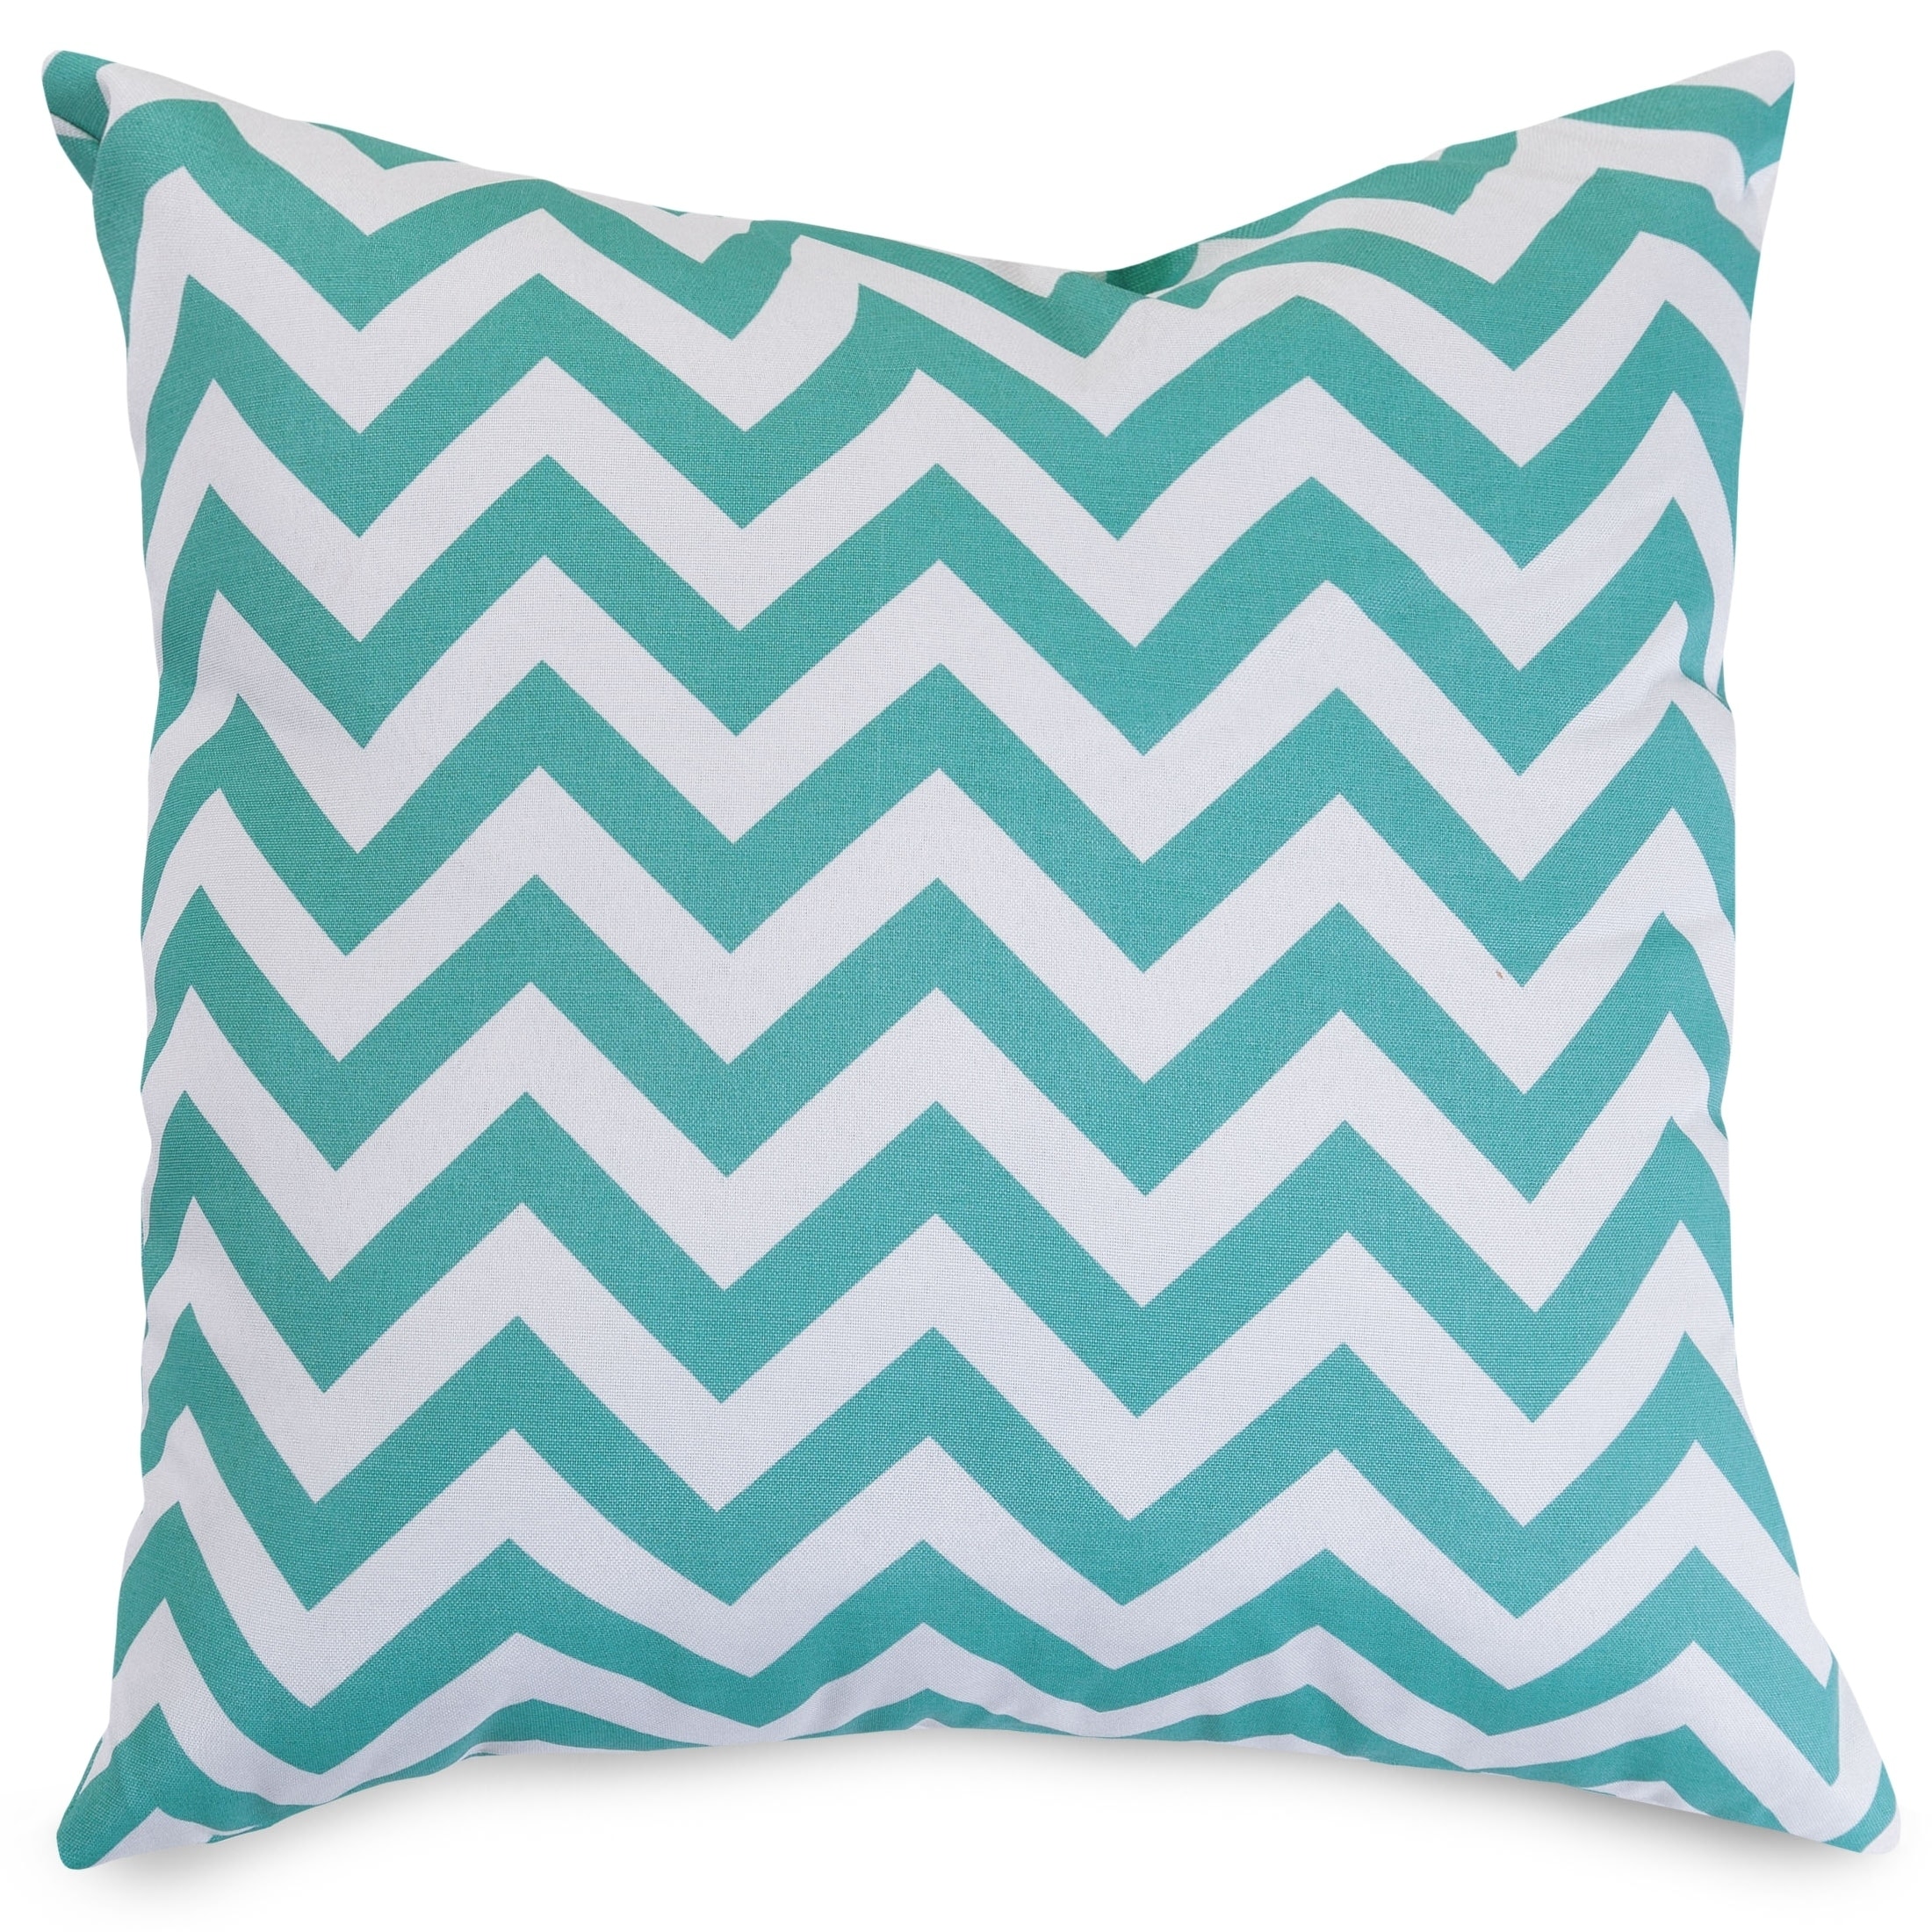 https://ak1.ostkcdn.com/images/products/22277133/Majestic-Home-Goods-Outdoor-Chevron-Extra-Large-Throw-Pillow-24-X-24-9b44441d-9b02-437b-b8e5-b3e2c8e412ae.jpg